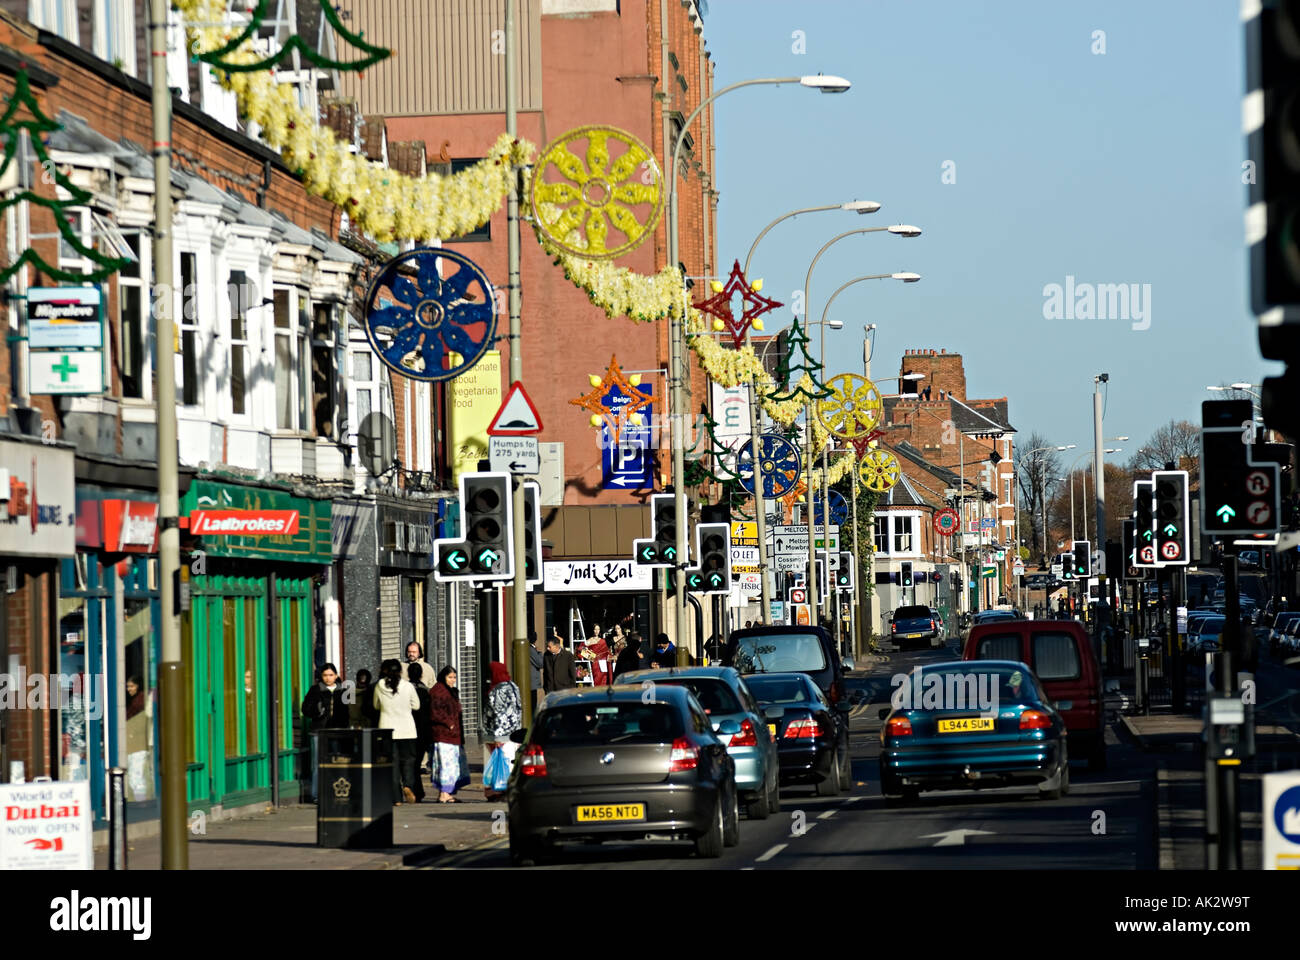 belgrave road in Leicester this is a famous long street in Leicester home to many asian book stores music and eating places with Stock Photo